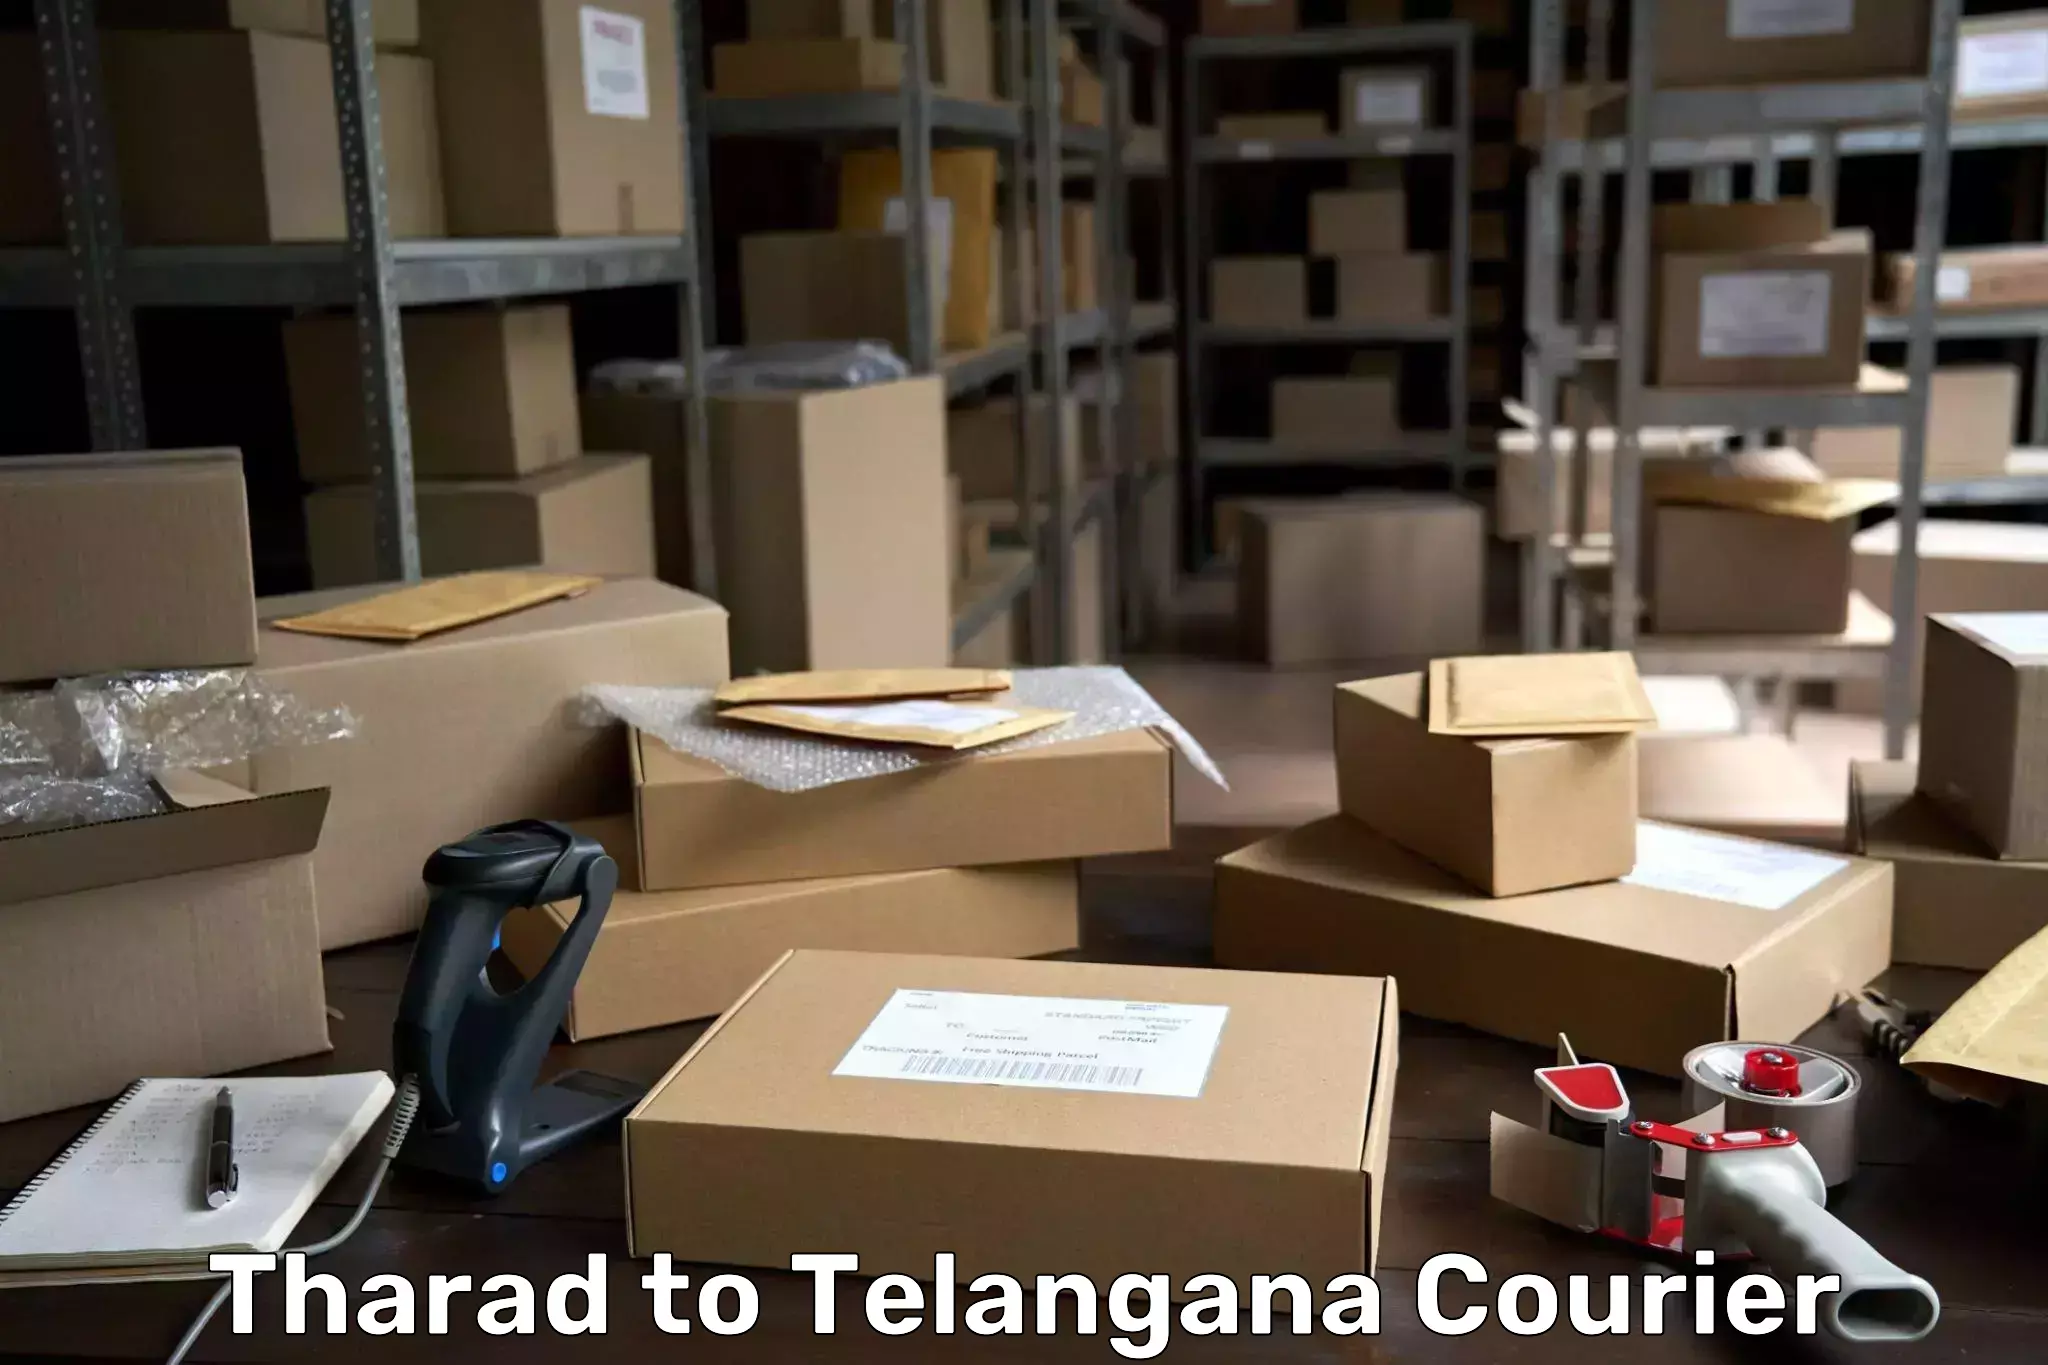 High-priority parcel service Tharad to Telangana